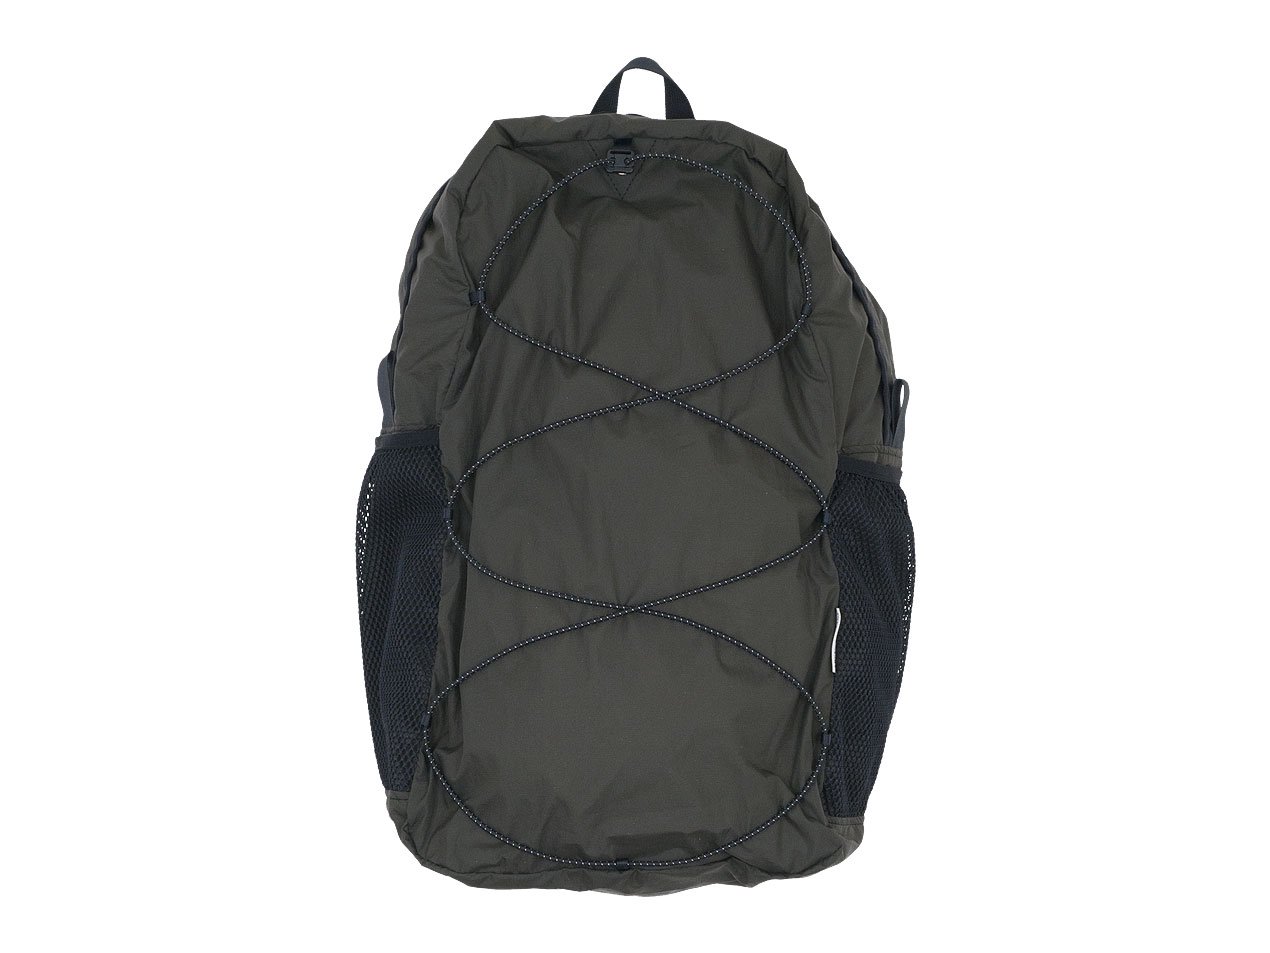 ENDS and MEANS PACKABLE BACK PACK - バッグ